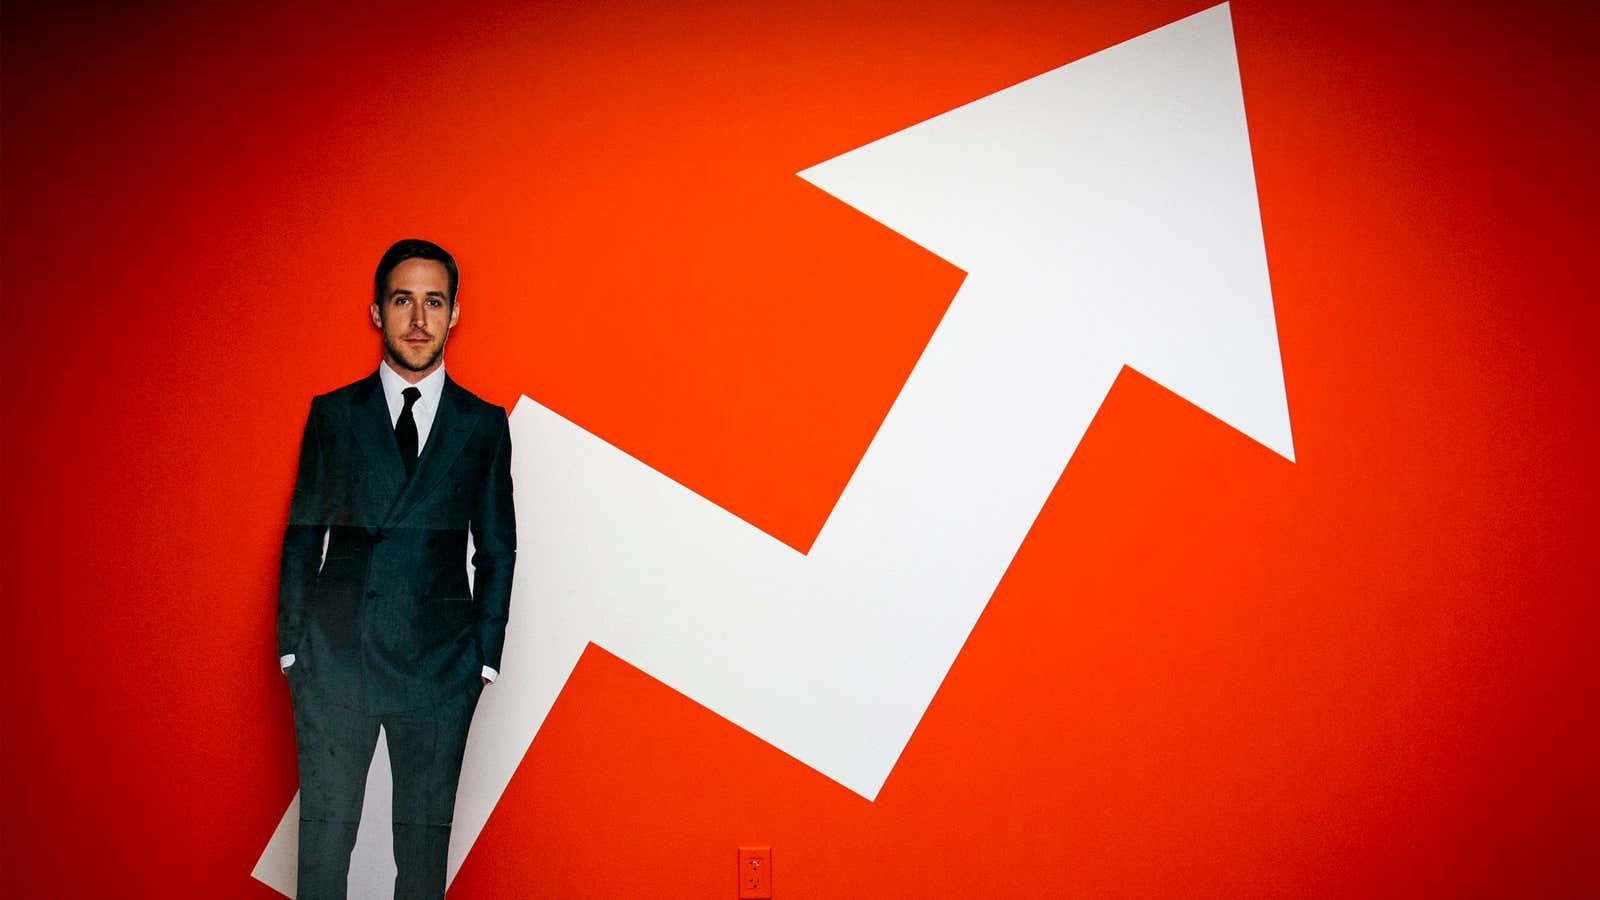 Buzzfeed’s valuation appears to be moving in this direction. (Ignore that cardboard cutout of Ryan Gosling.)